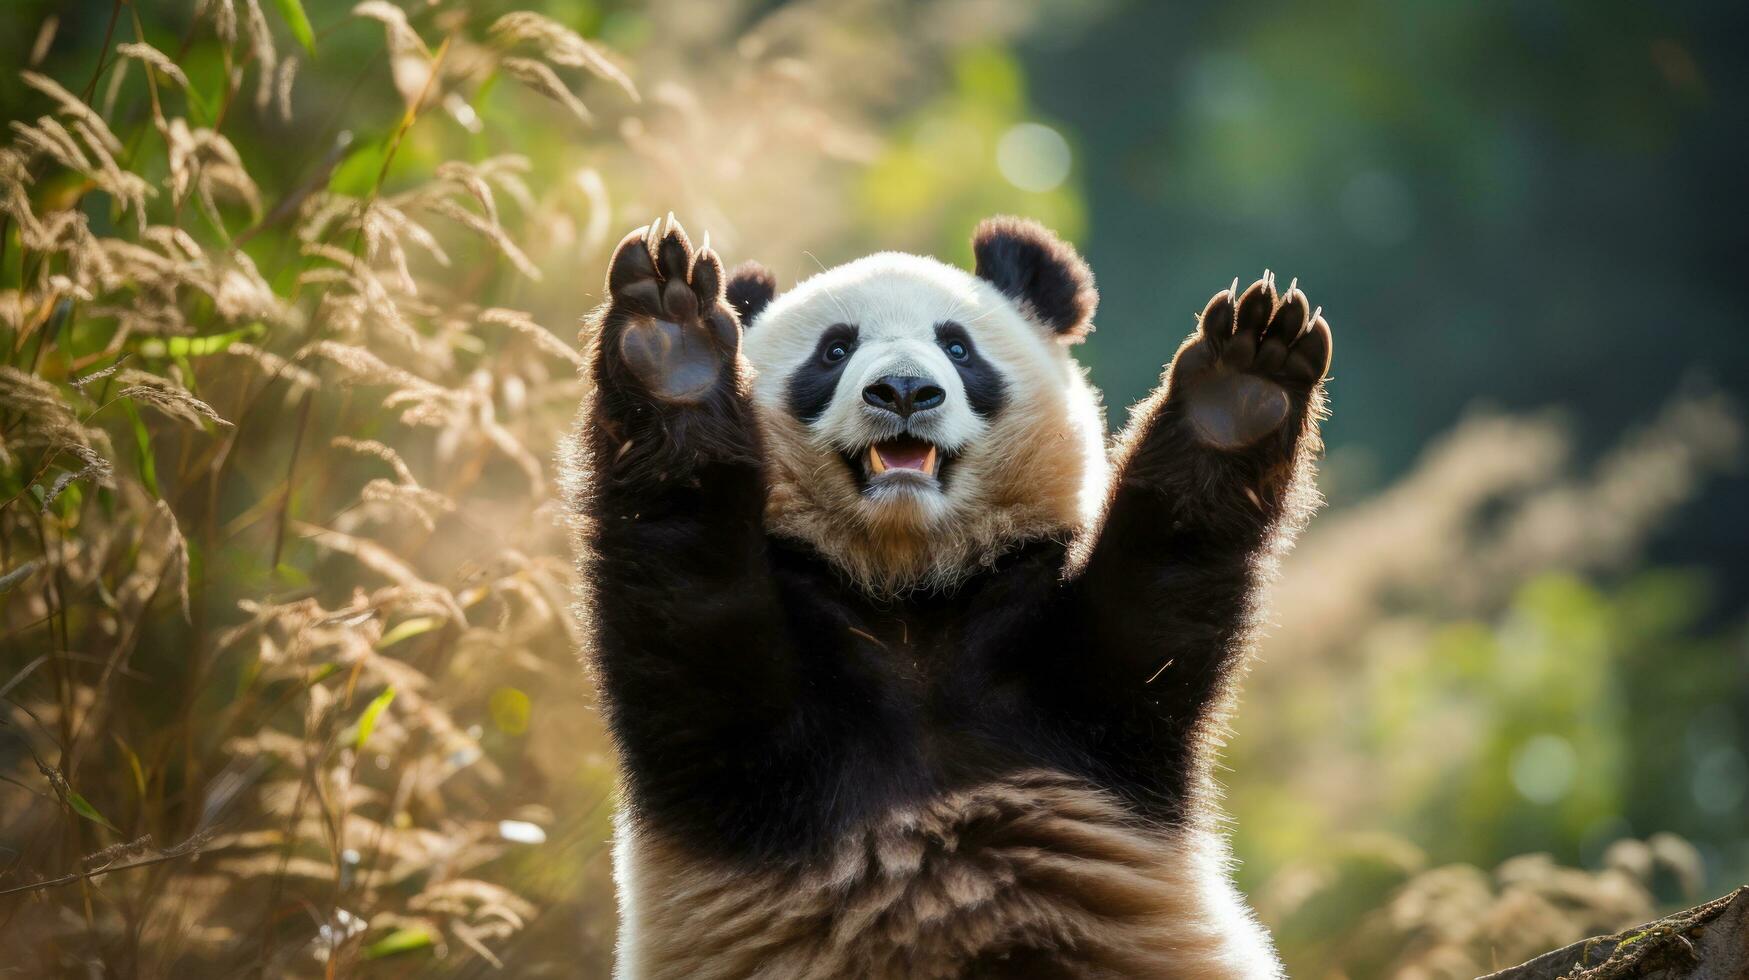 A panda standing on its hind legs, reaching up to grab some bamboo photo